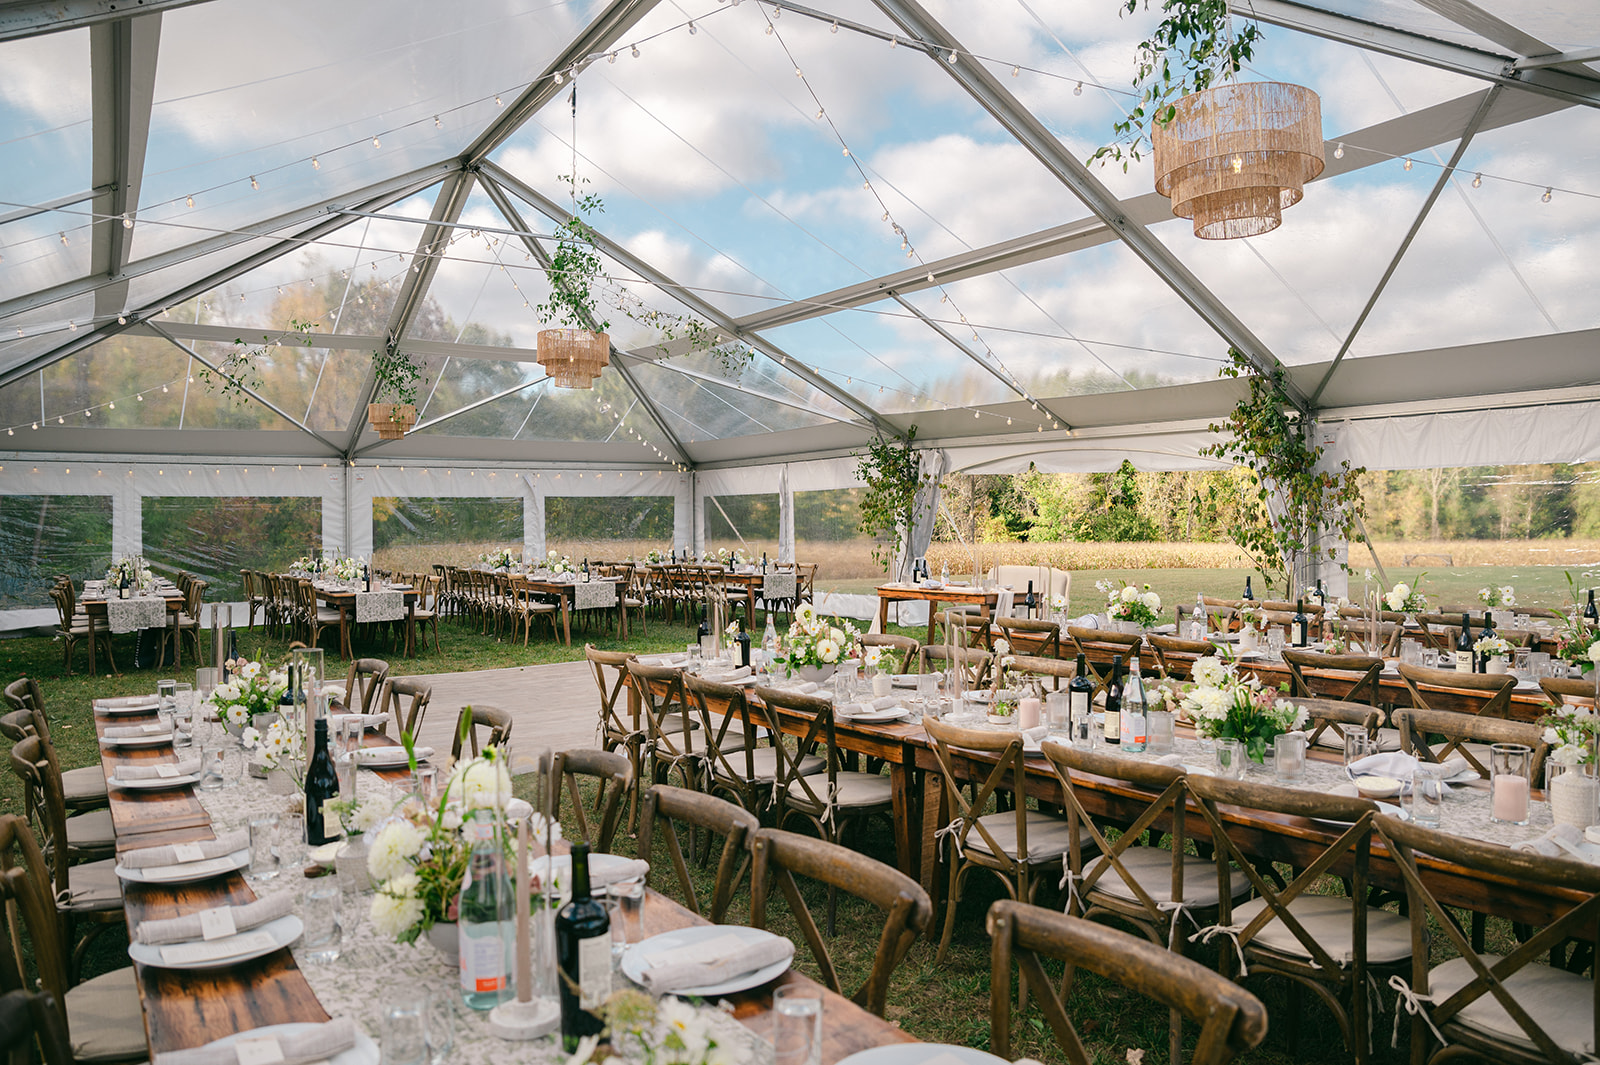 Clear frame tent set up in a field. Long tables are set for a wedding reception with a wooden dance floor in the middle.